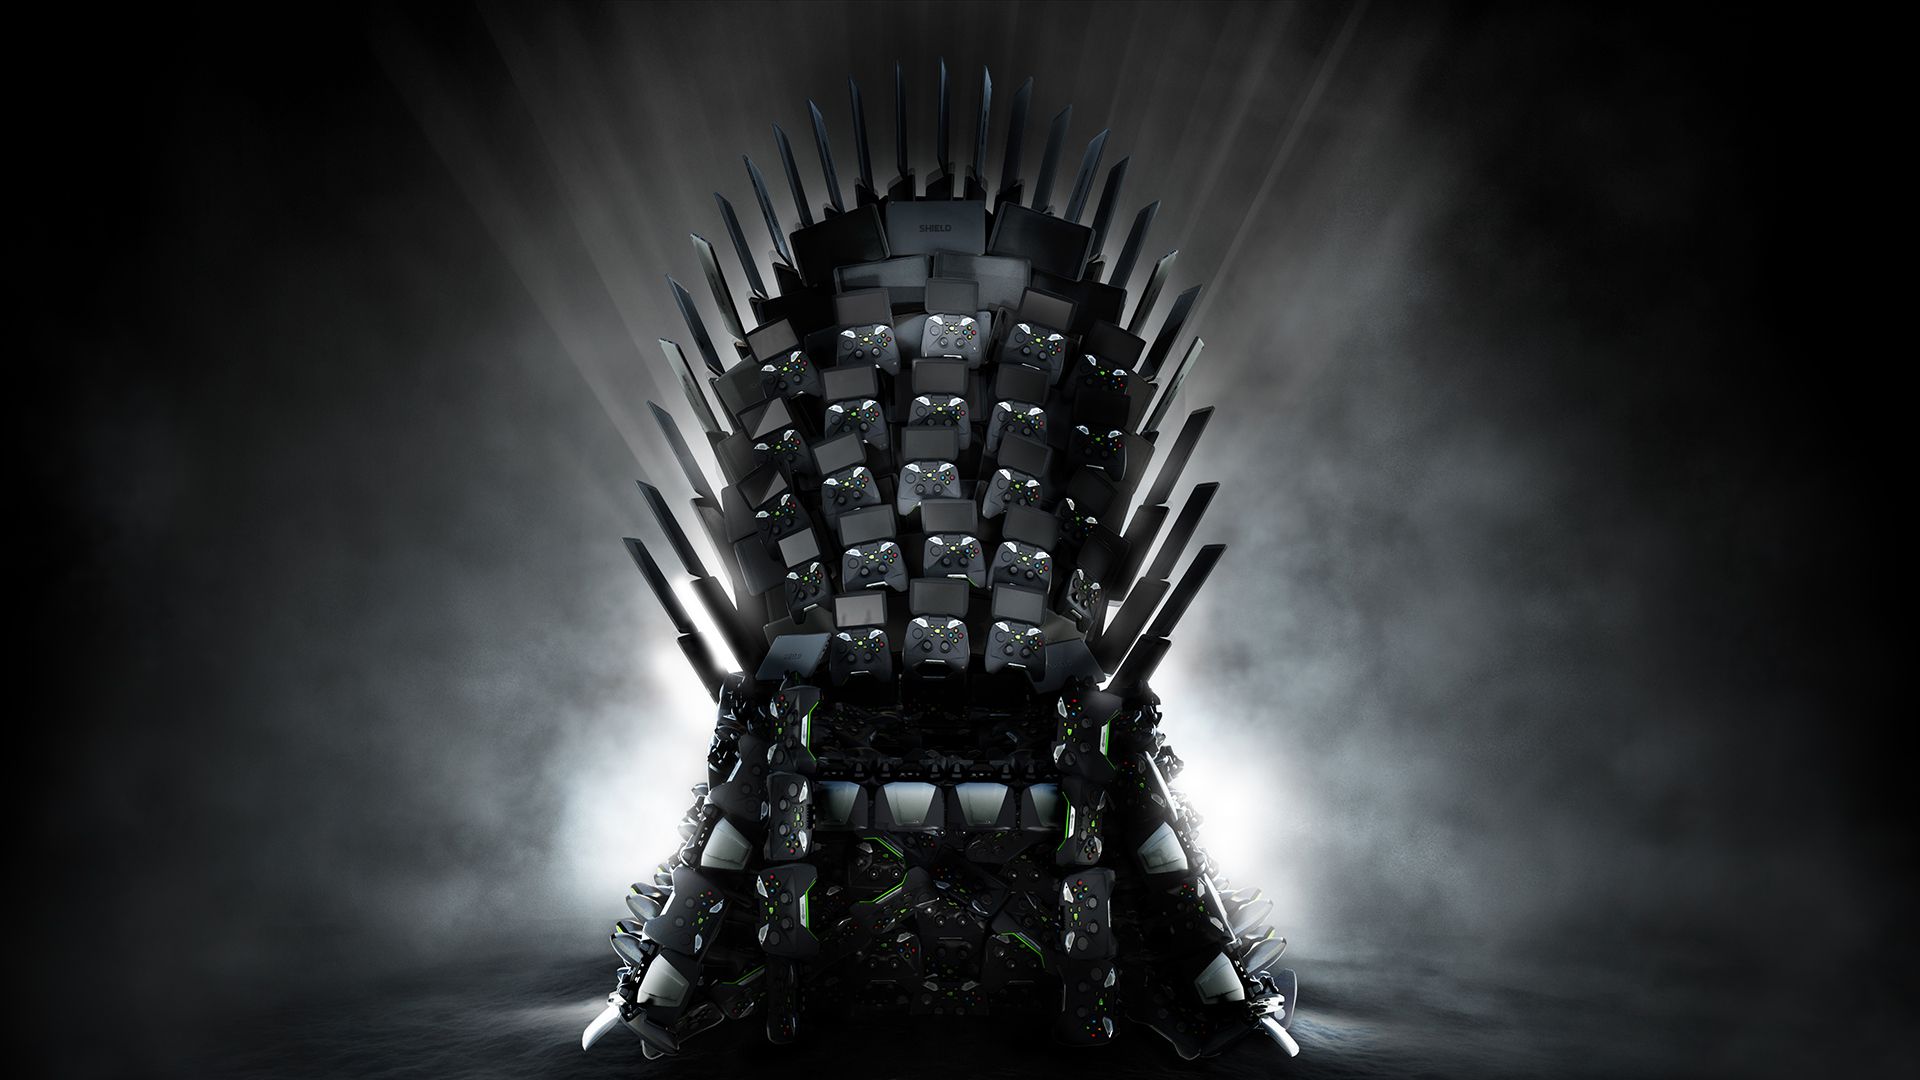 24+] Game Of Thrones Chair Wallpapers